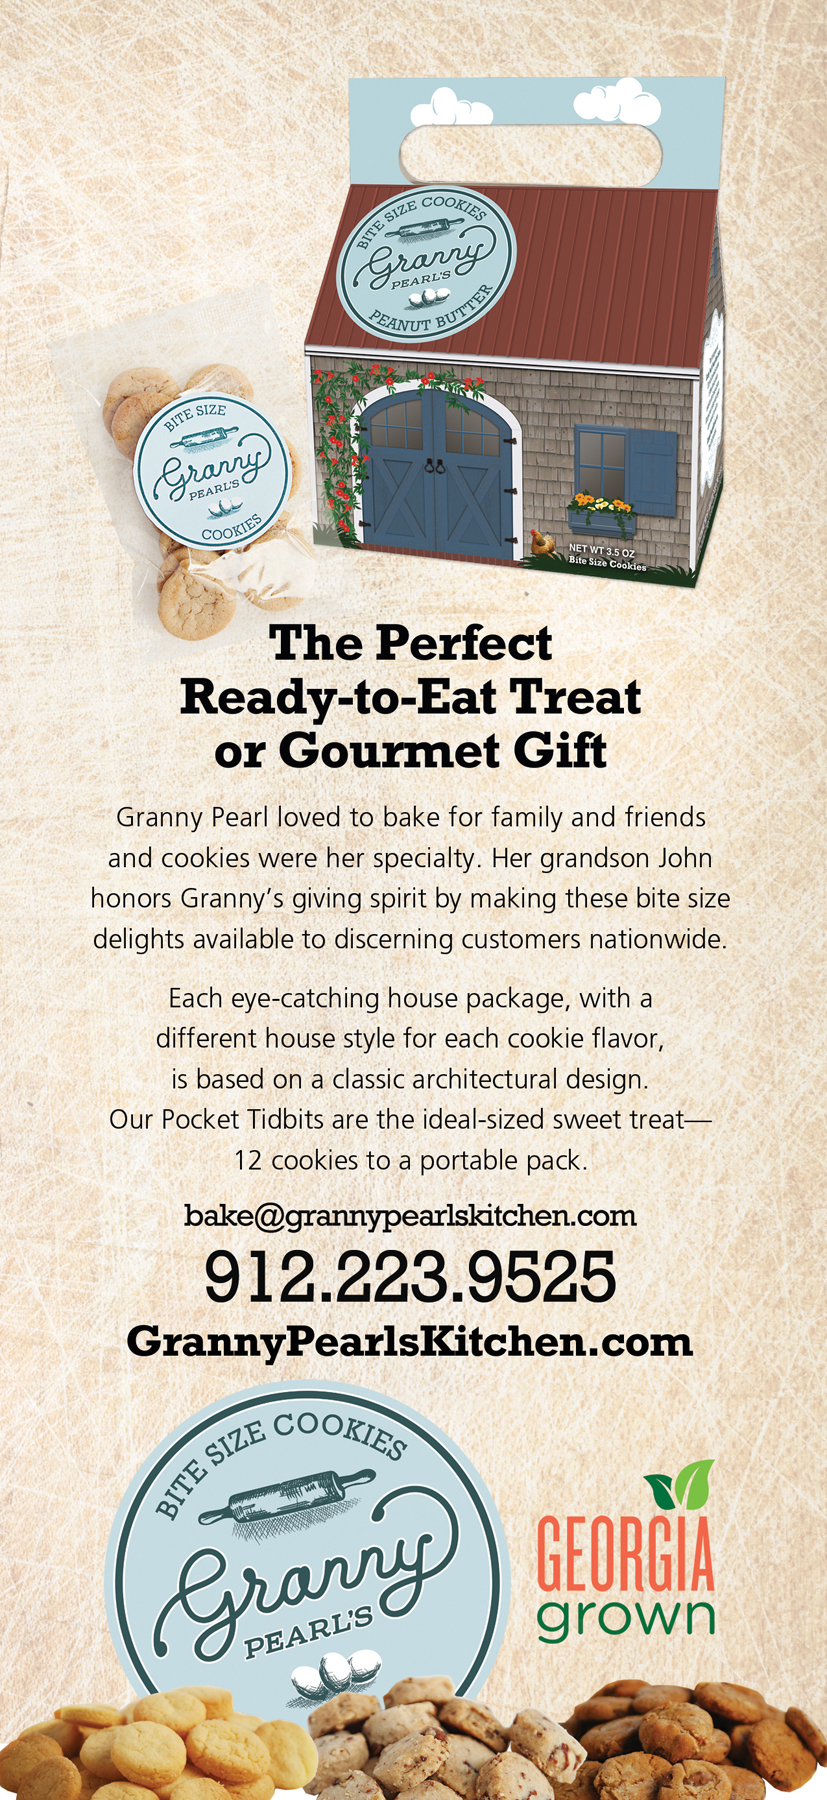 In addition to the house packaging, Granny Pearl’s cookies are also available in smaller Pocket Tidbit packs.